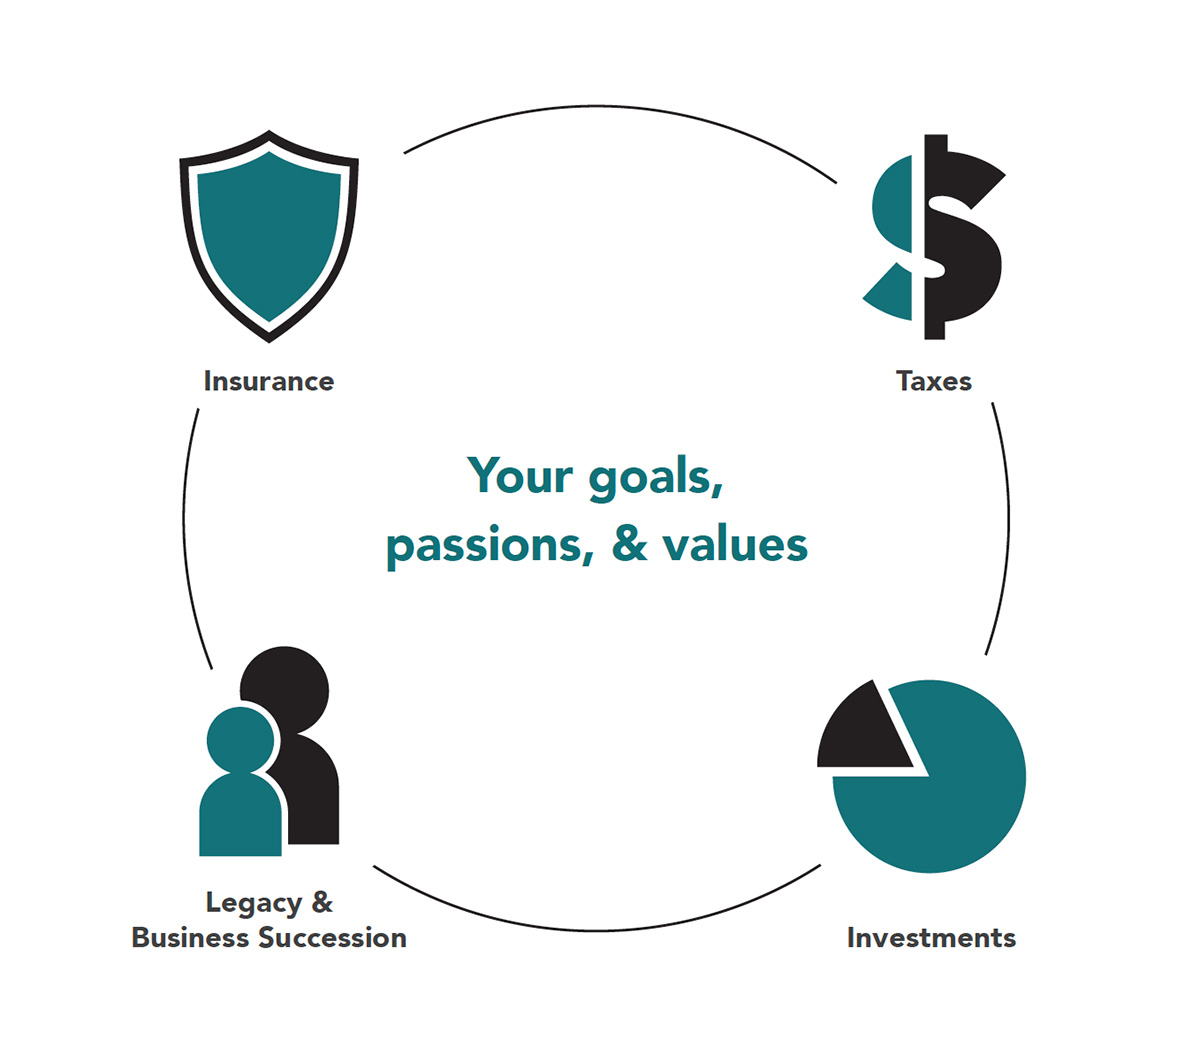 Aligning insurances, taxes, legacy & succession planning, and investment management around your goals, passions, and values.